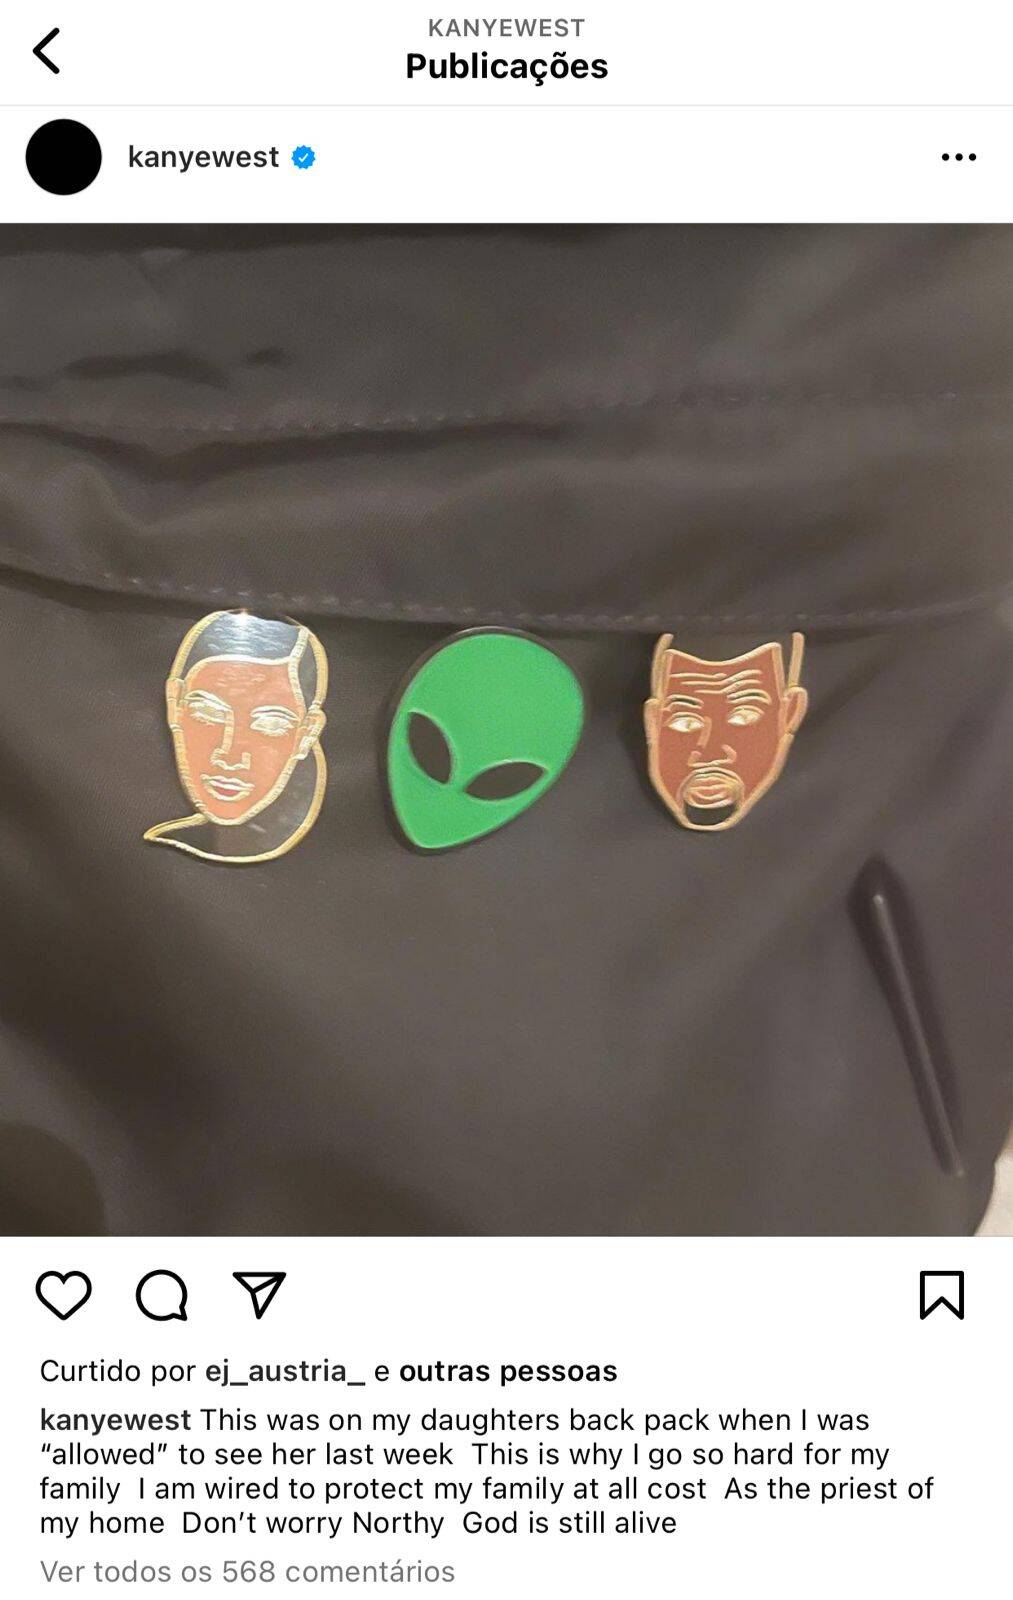  Ye made a new post on Instagram condemning the use of brooches in his children’s backpacks. (Photo: Instagram)